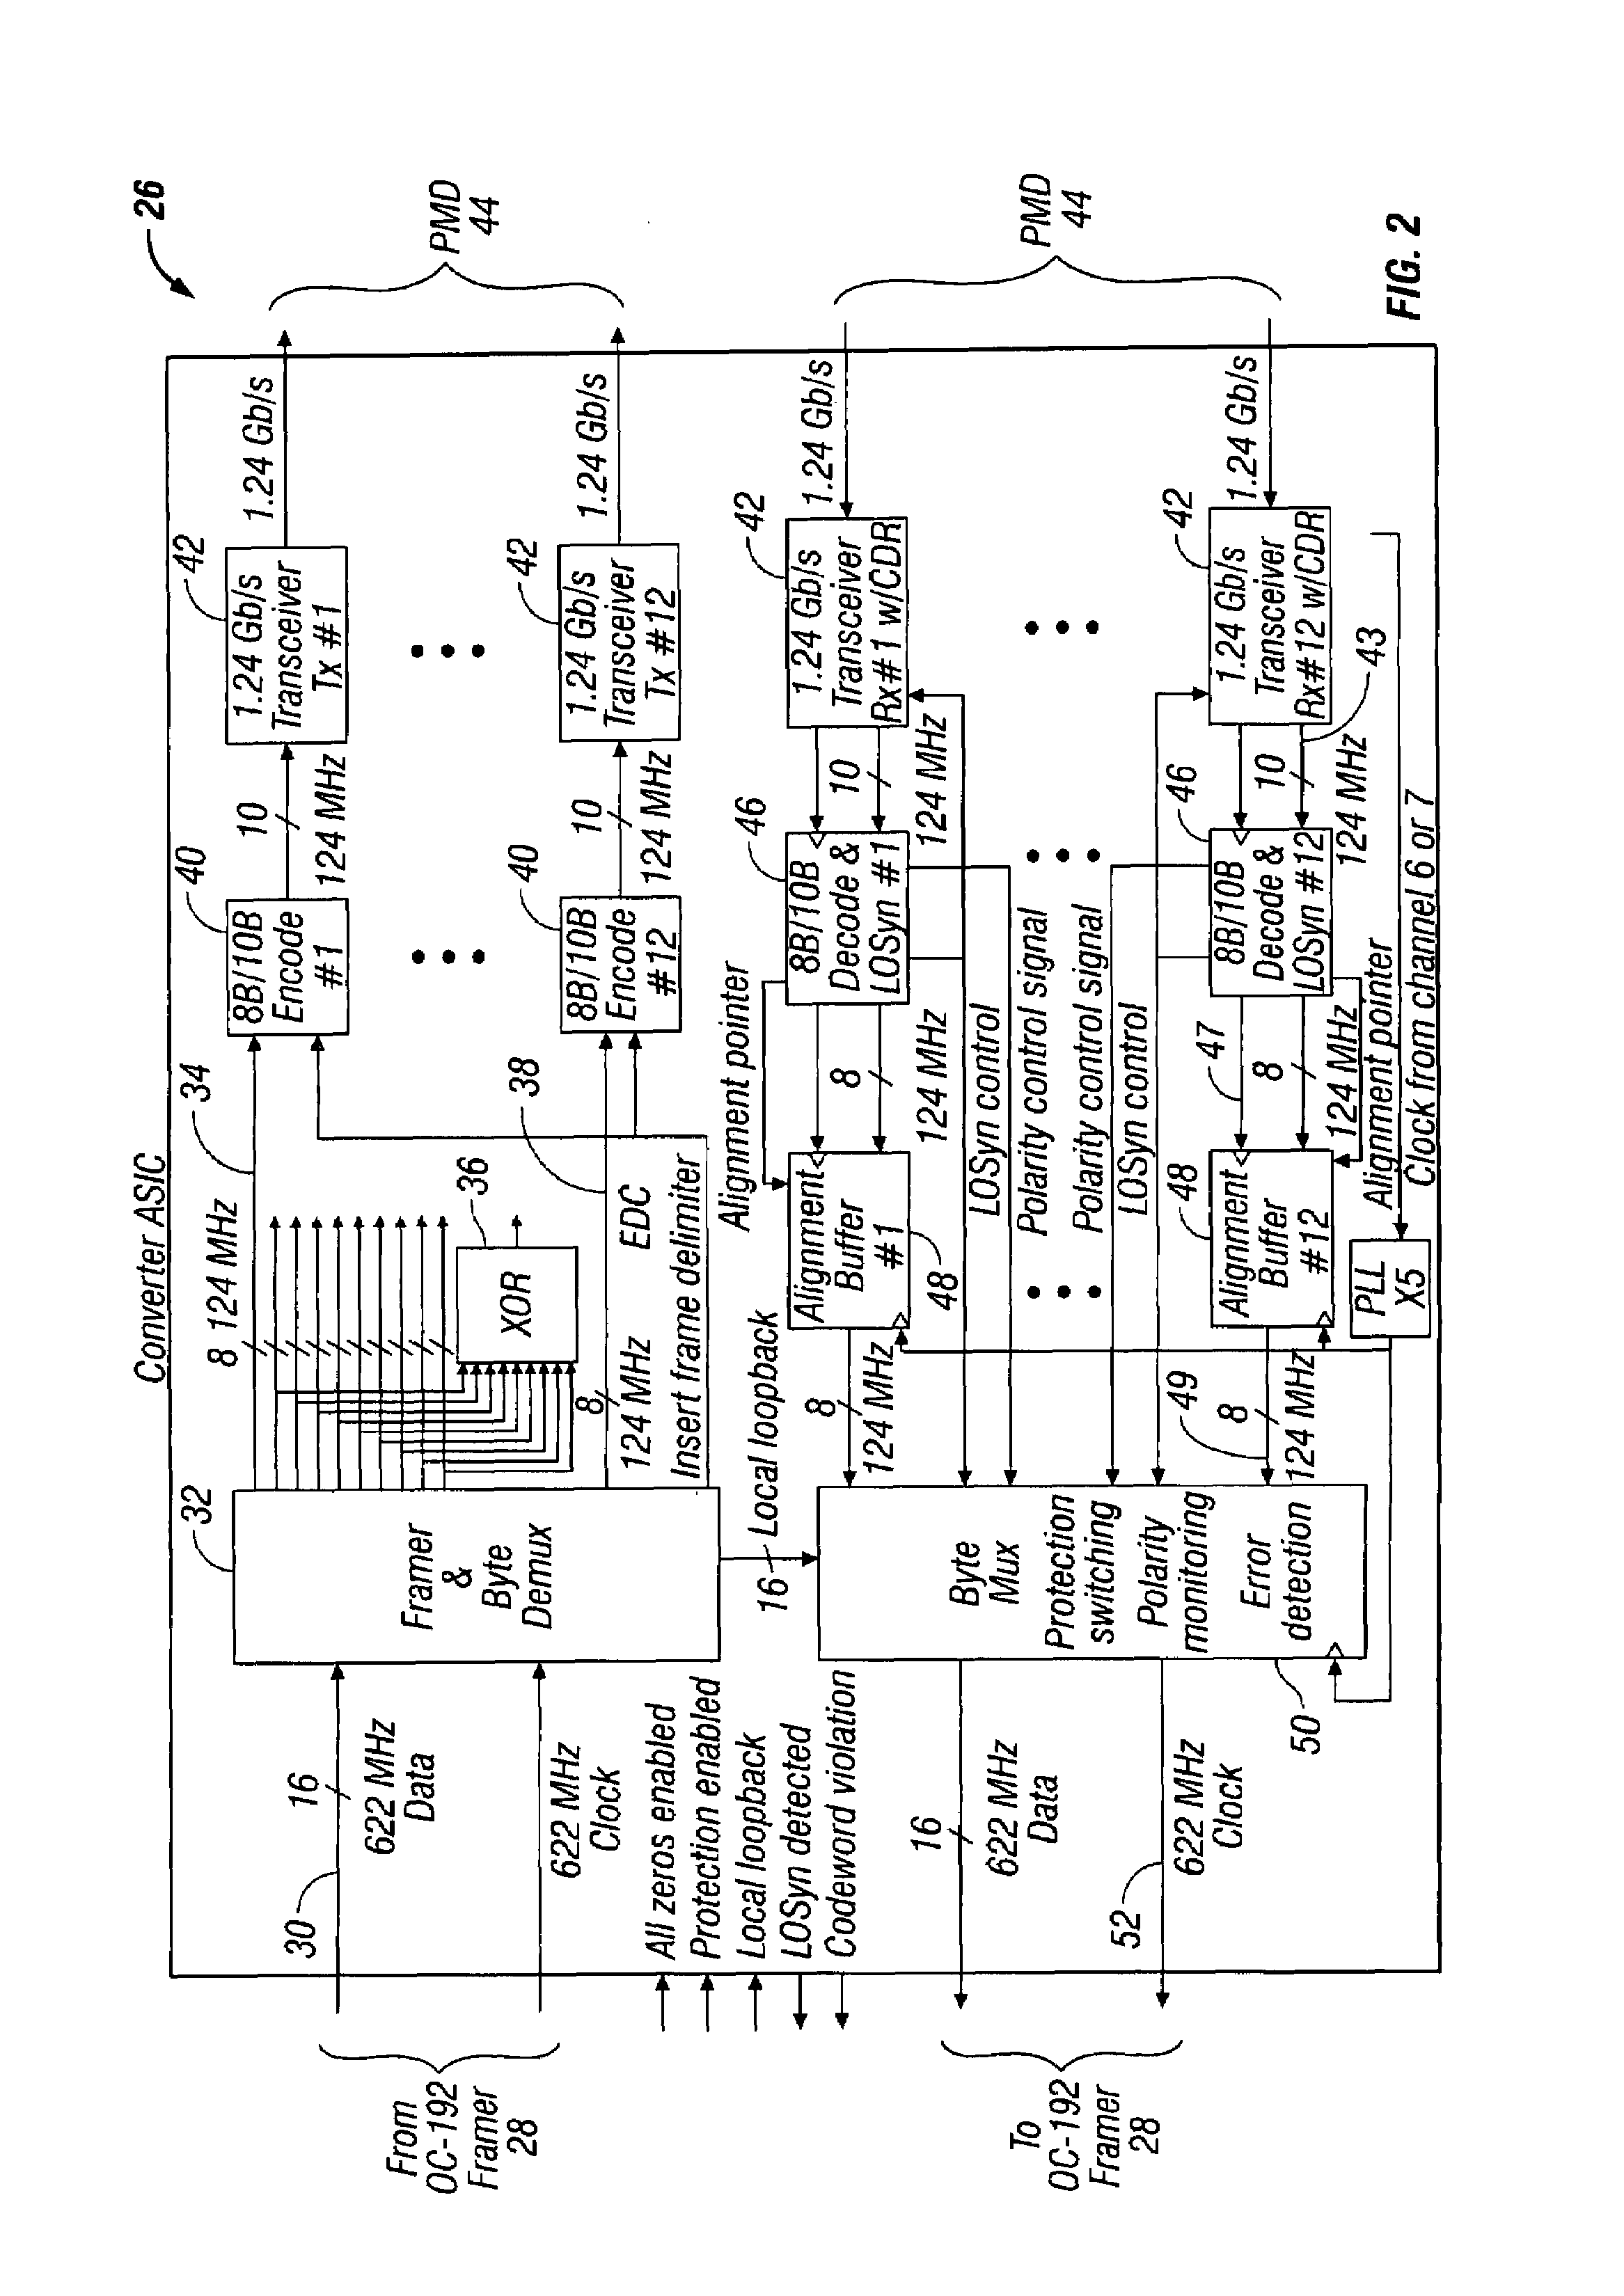 Method and apparatus for transferring synchronous optical network/synchronous digital hierarchy(SONET/SDH) frames on parallel transmission links